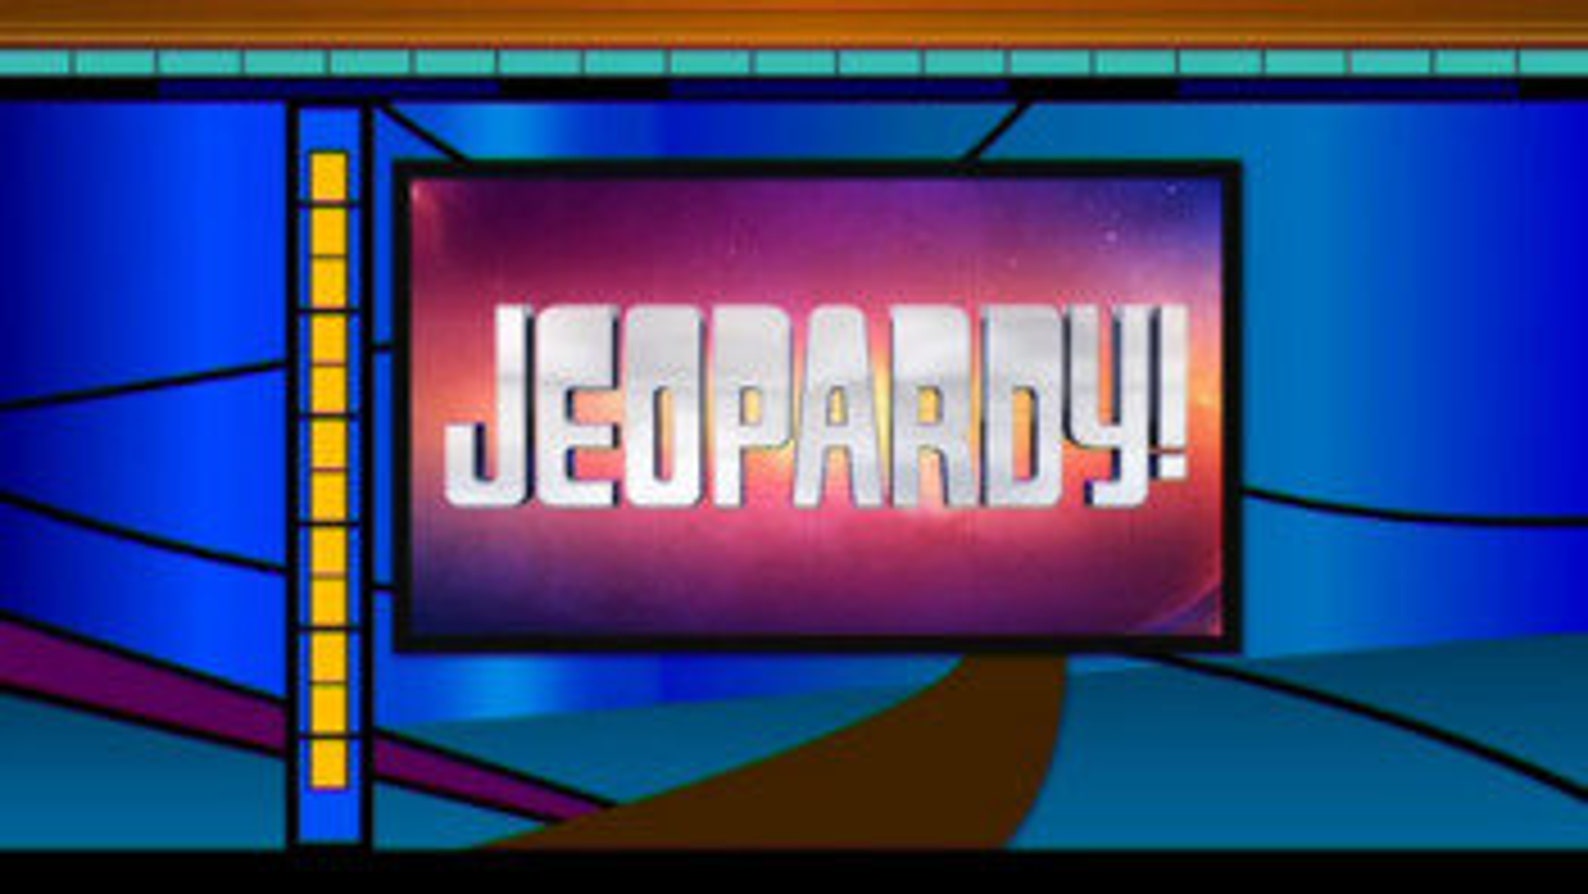 Jeopardy Powerpoint Game Template V25 Etsy